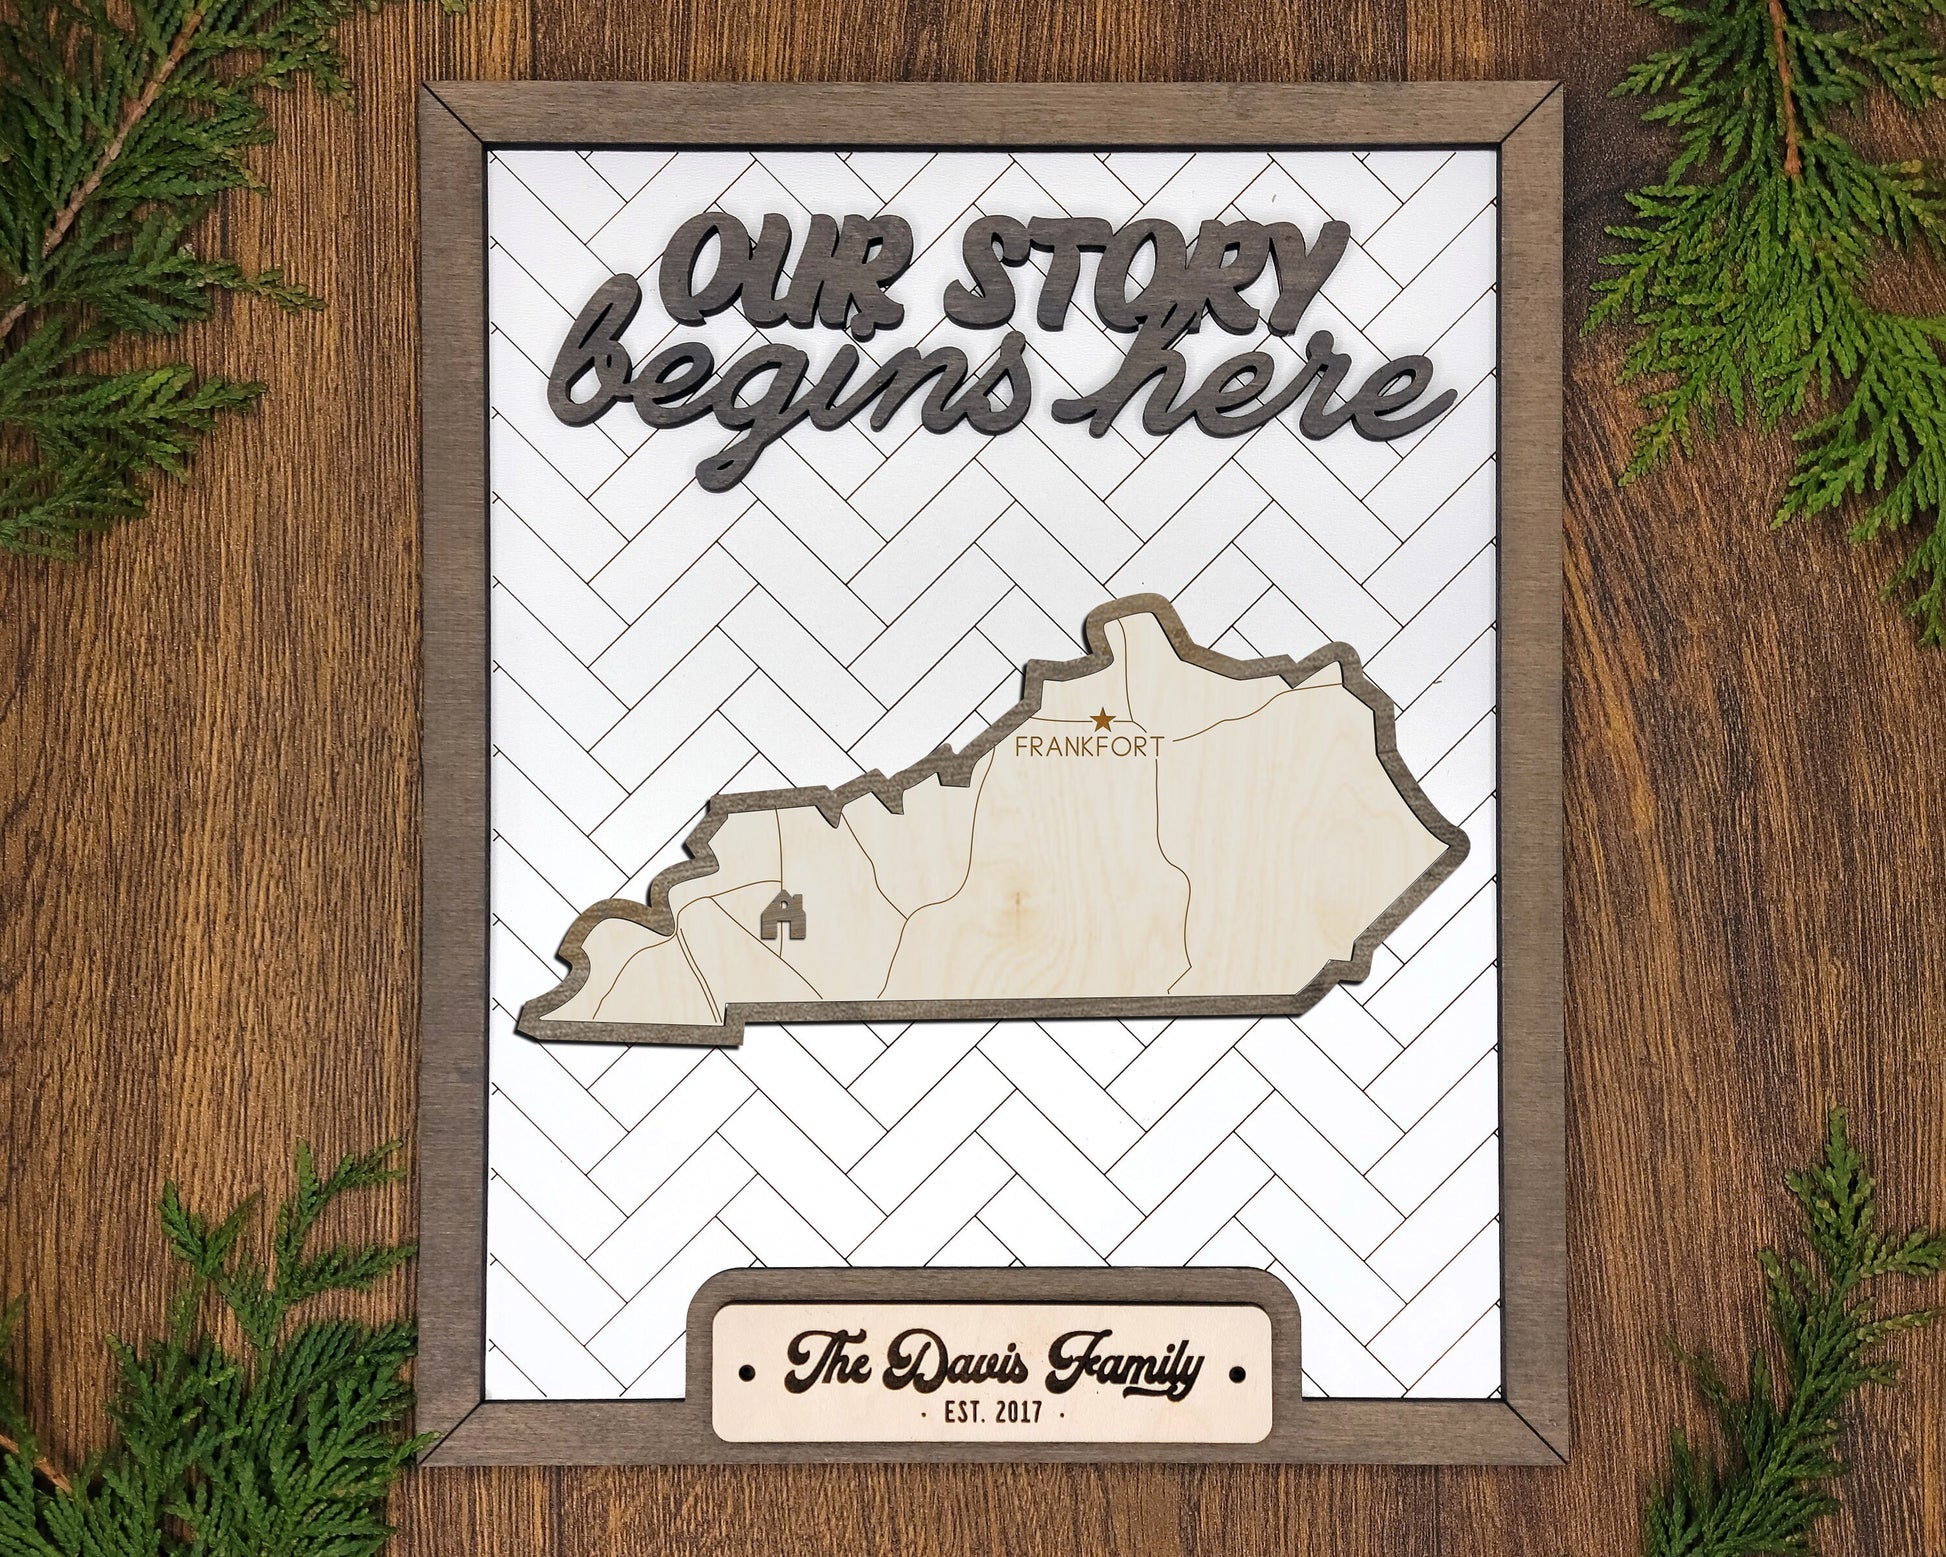 The Kentucky State Frame - 13 text options, 12 backgrounds, 25 icons Included - Make over 7,500 designs - Glowforge & Lightburn Tested